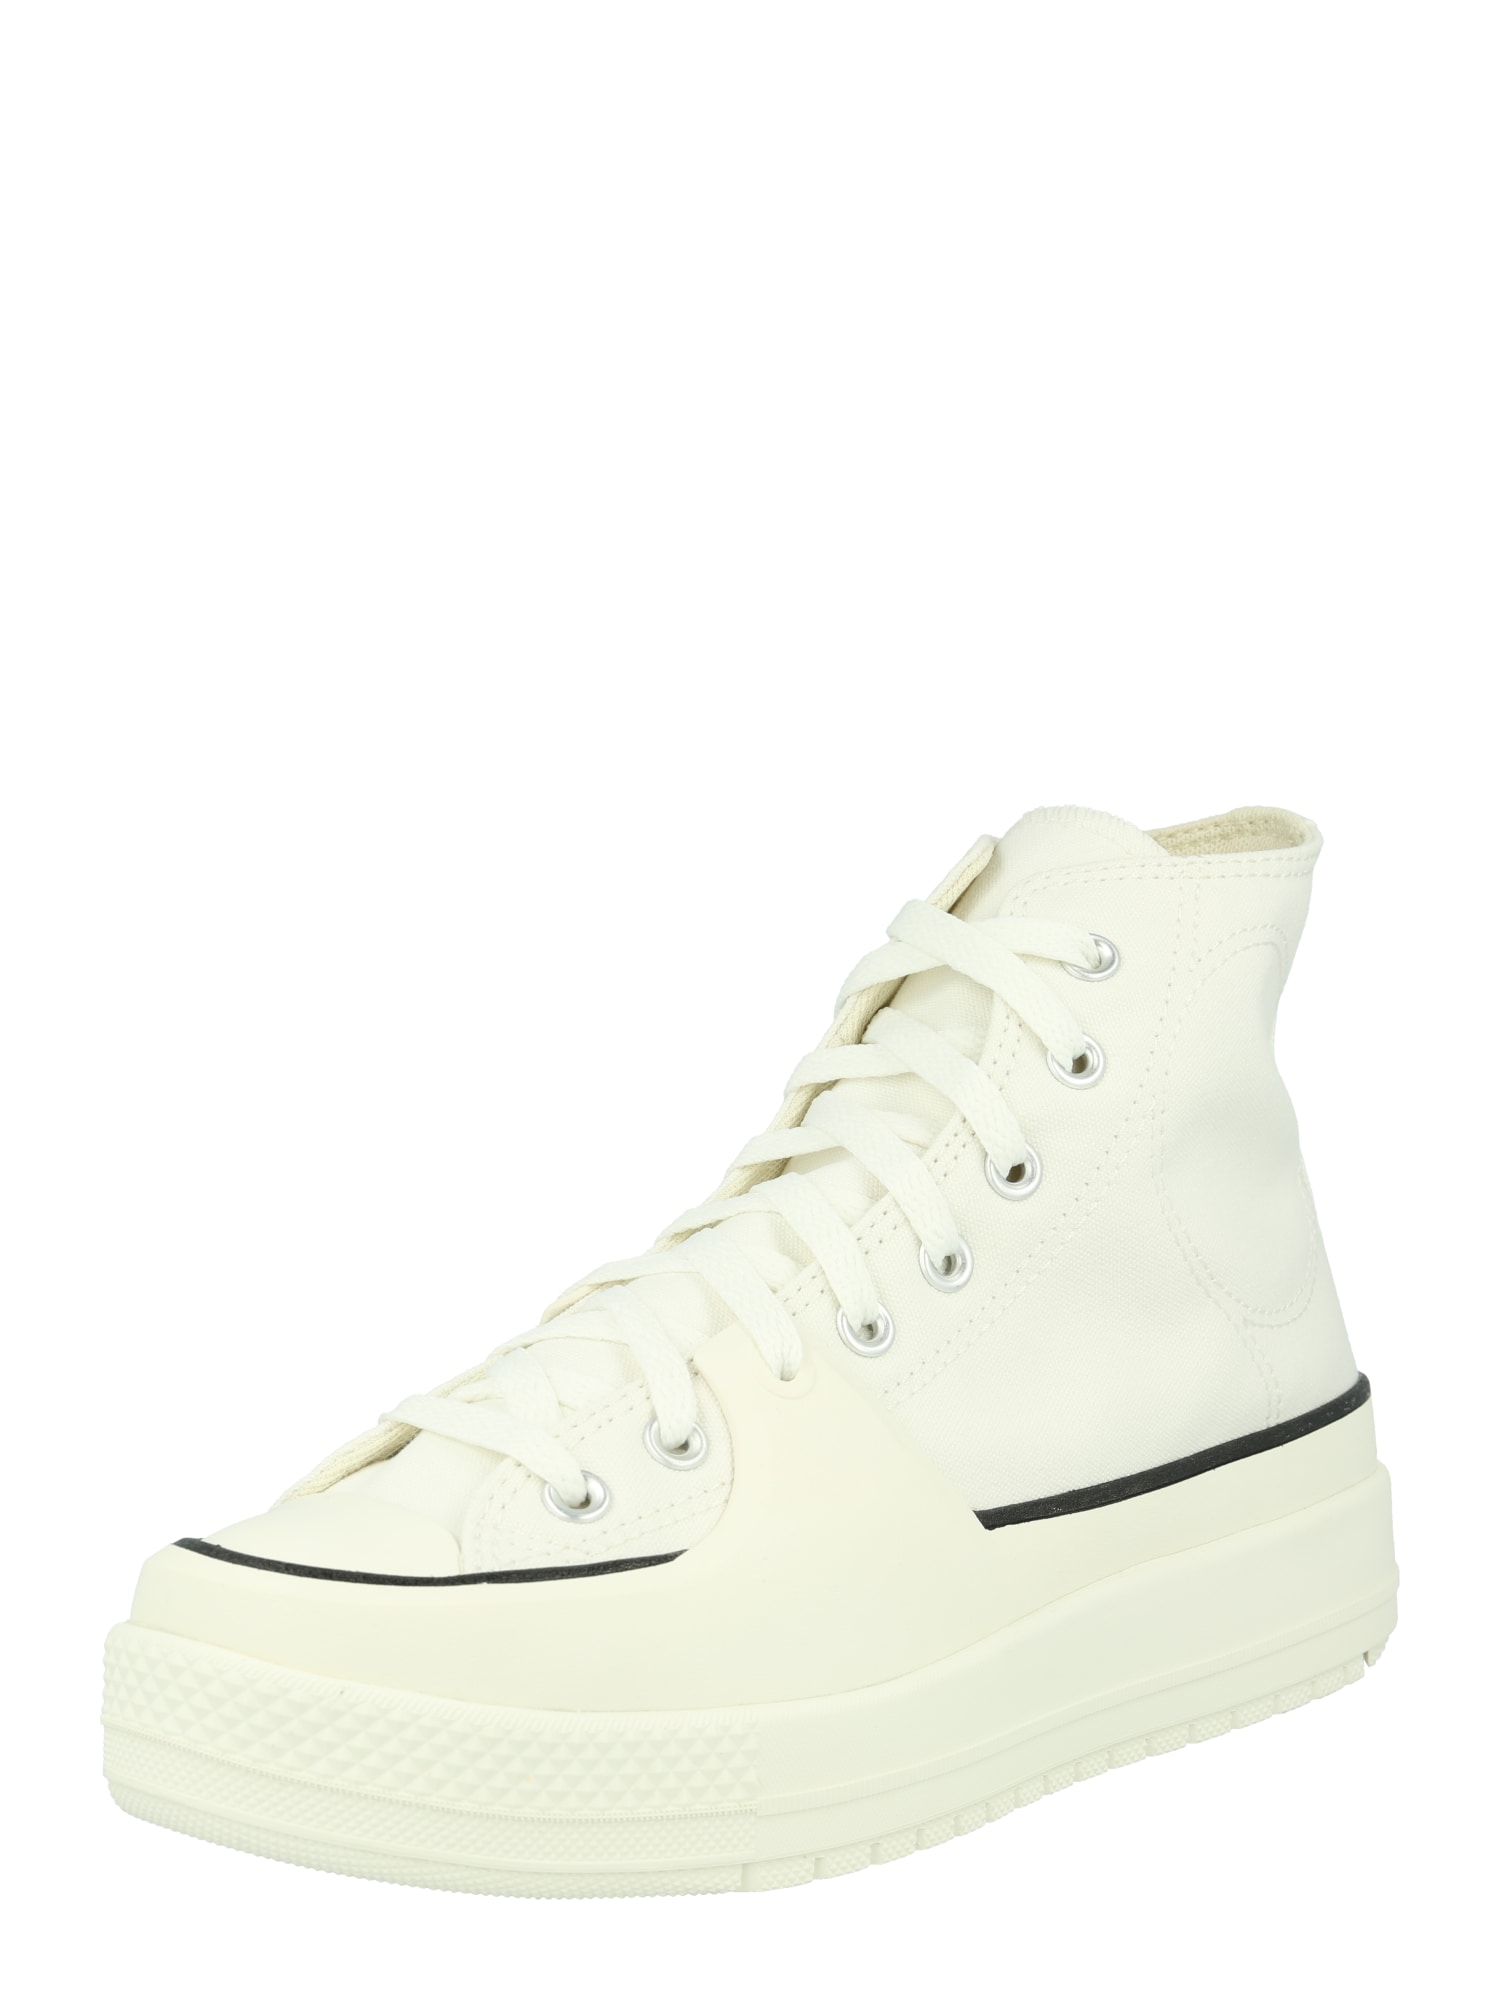 Converse CONVERSE Sneaker 'Chuck Taylor All Star' champagner